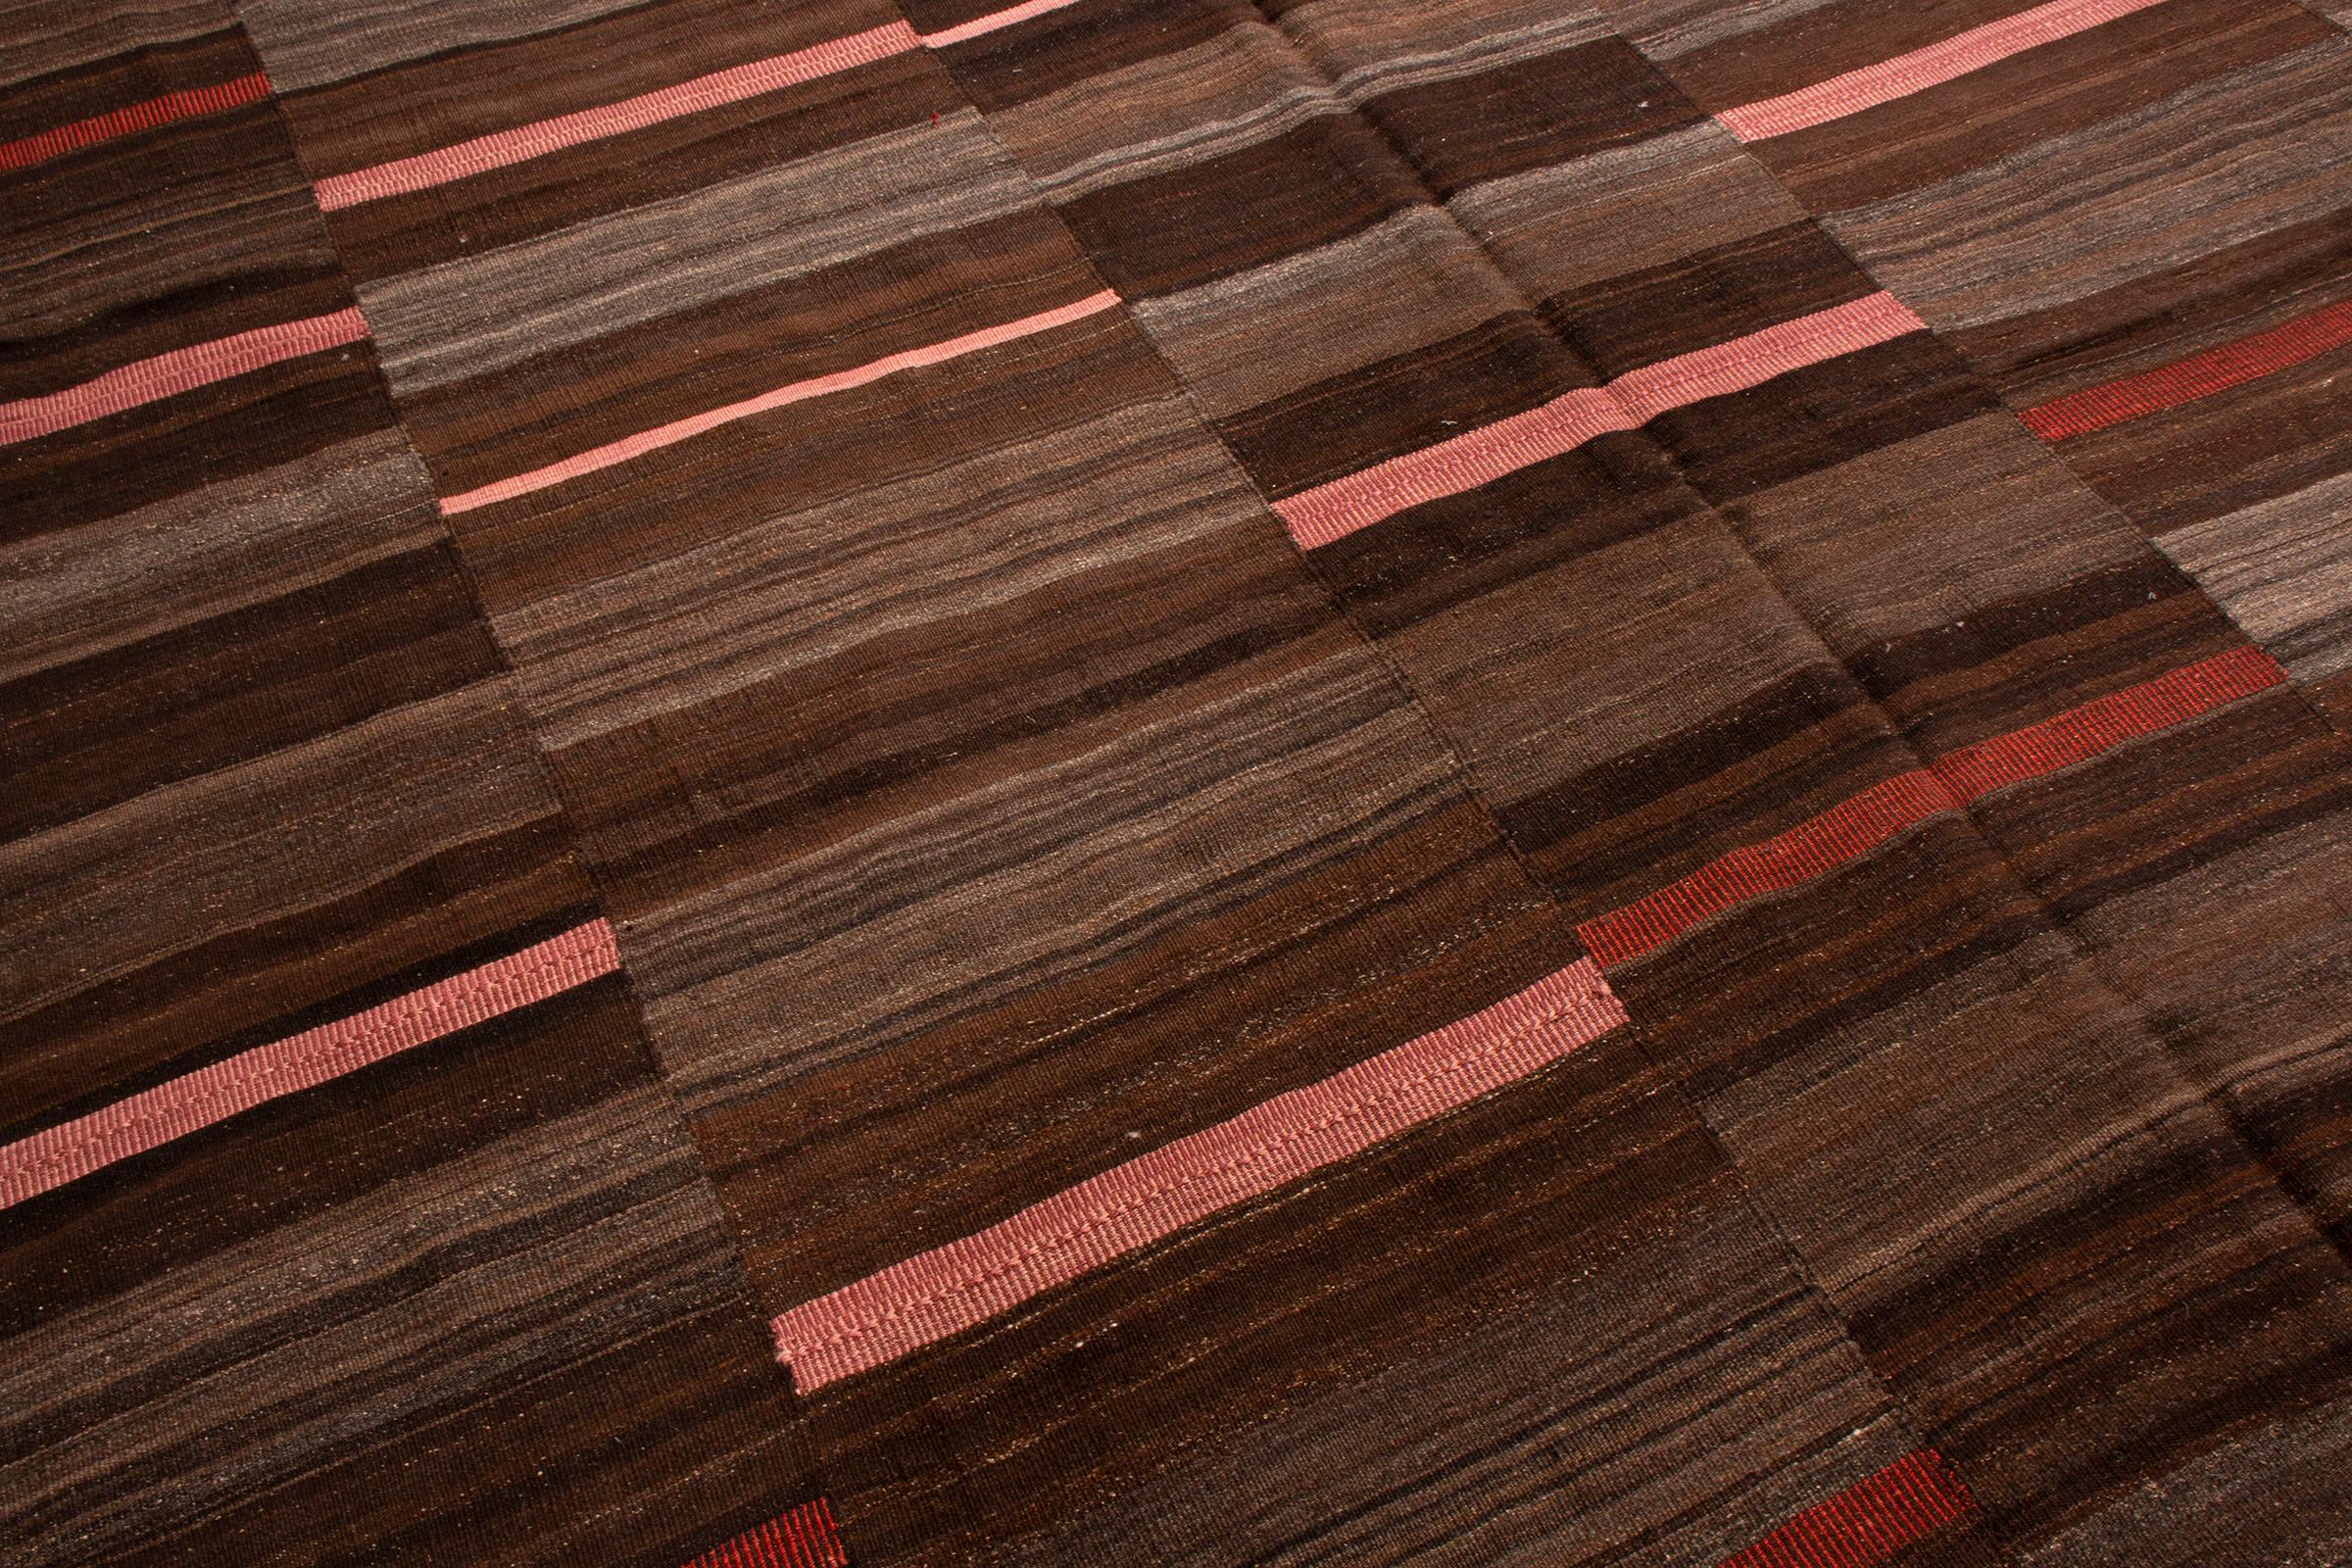 Originating from Pakistan in the 1950s, this vintage transitional wool kilim is of a unique family woven in vertical panels, each of the five with their own variation of an eccentric geometric design. Flat woven in high quality wool with distinct,